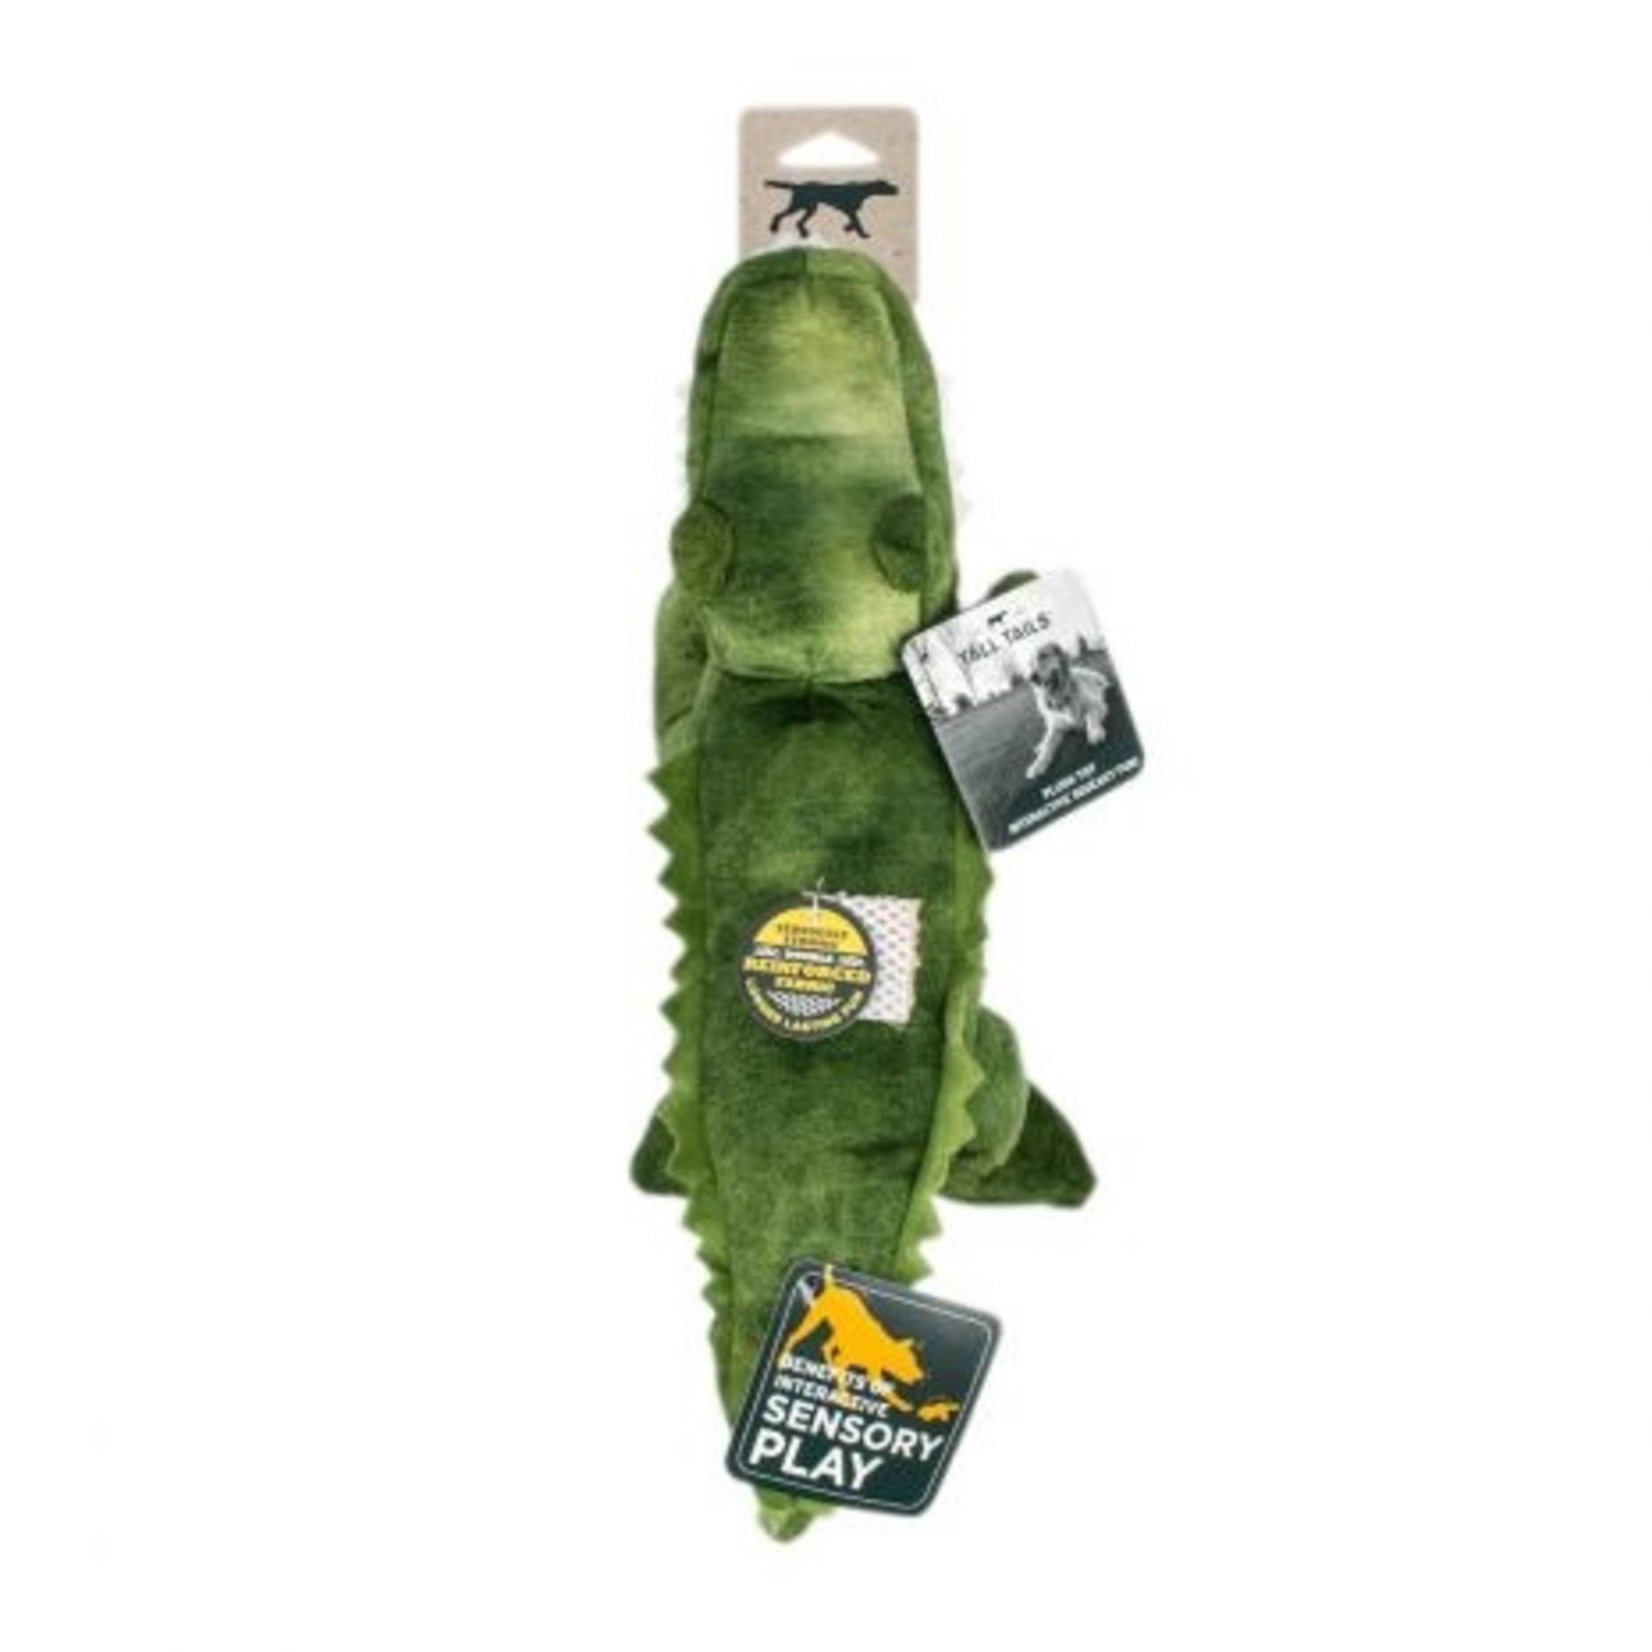 Tall Tails TALL TAILS Crunch Alligator Dog Toy